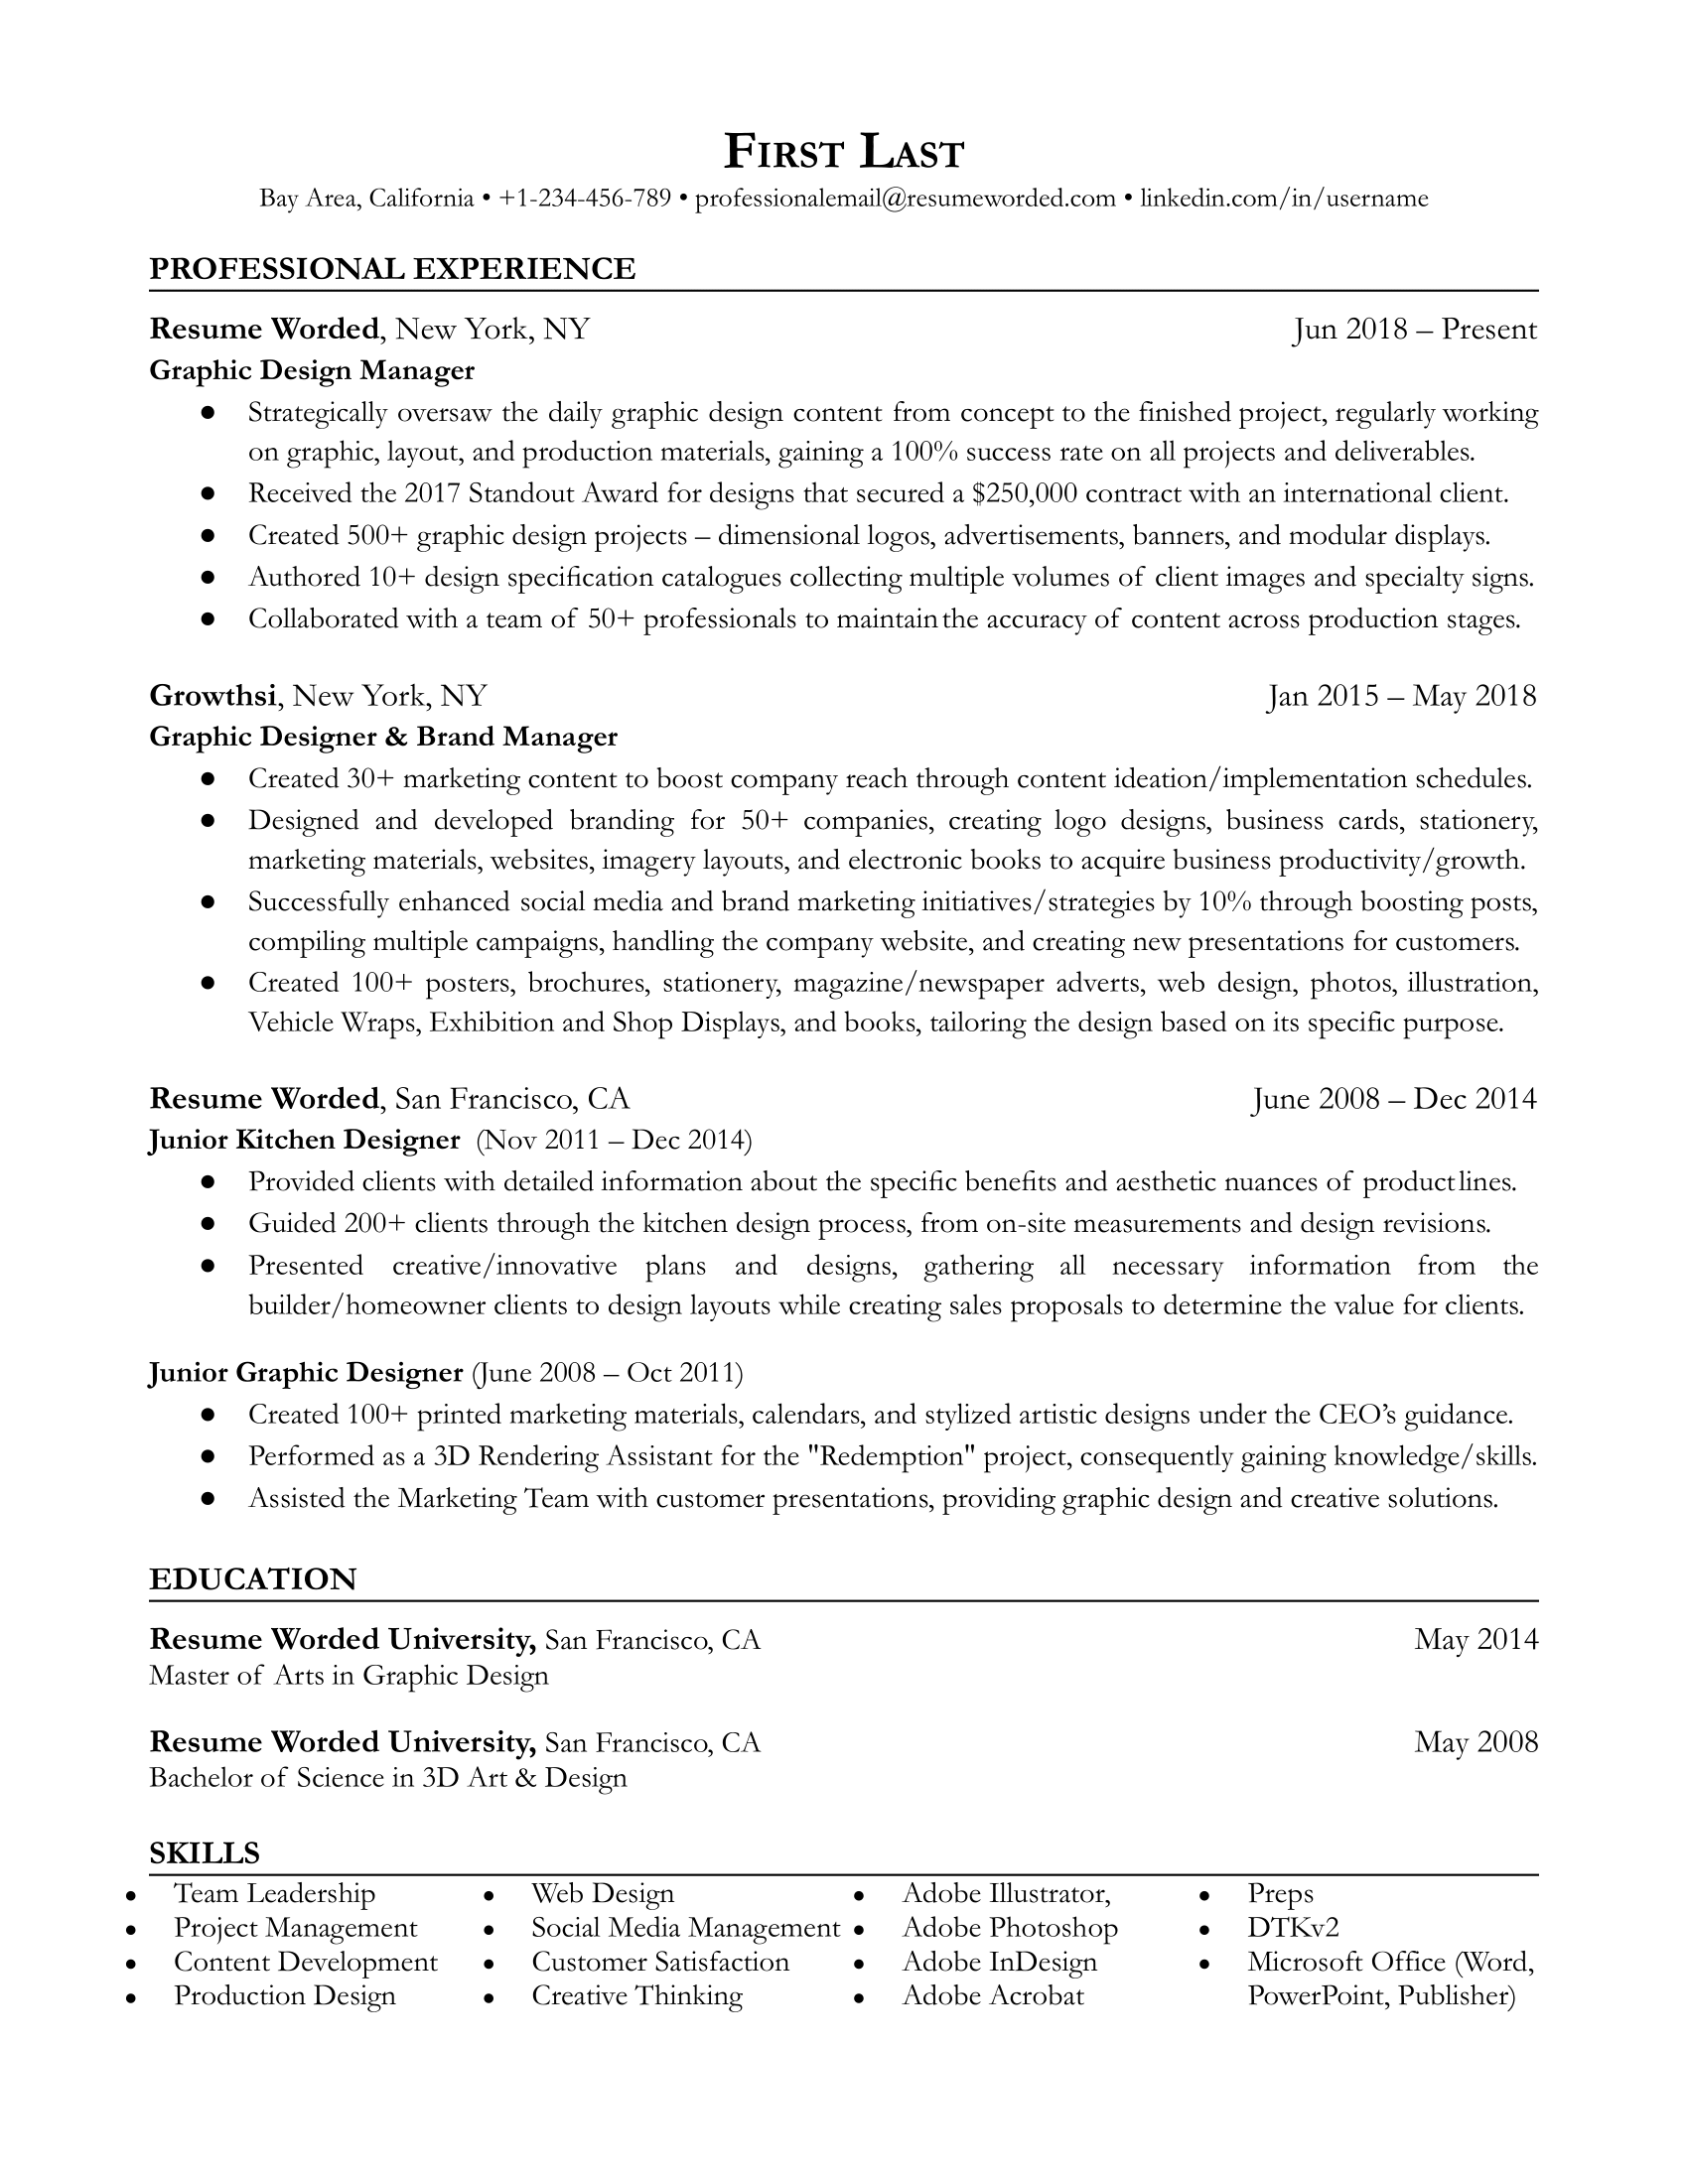 Graphic design manager resume template example using metrics and accomplishments to highlight transferable skills